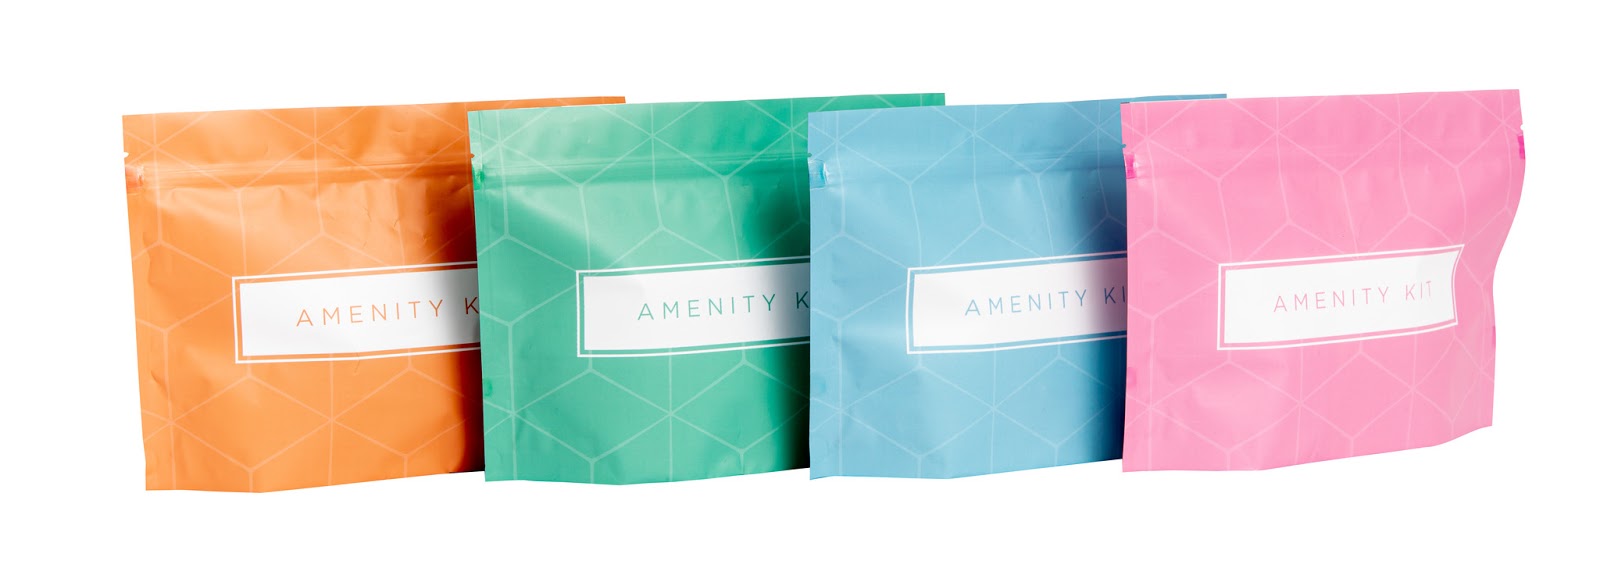 on-acquiring-and-growing-a-vacation-rental-amenity-kits-business